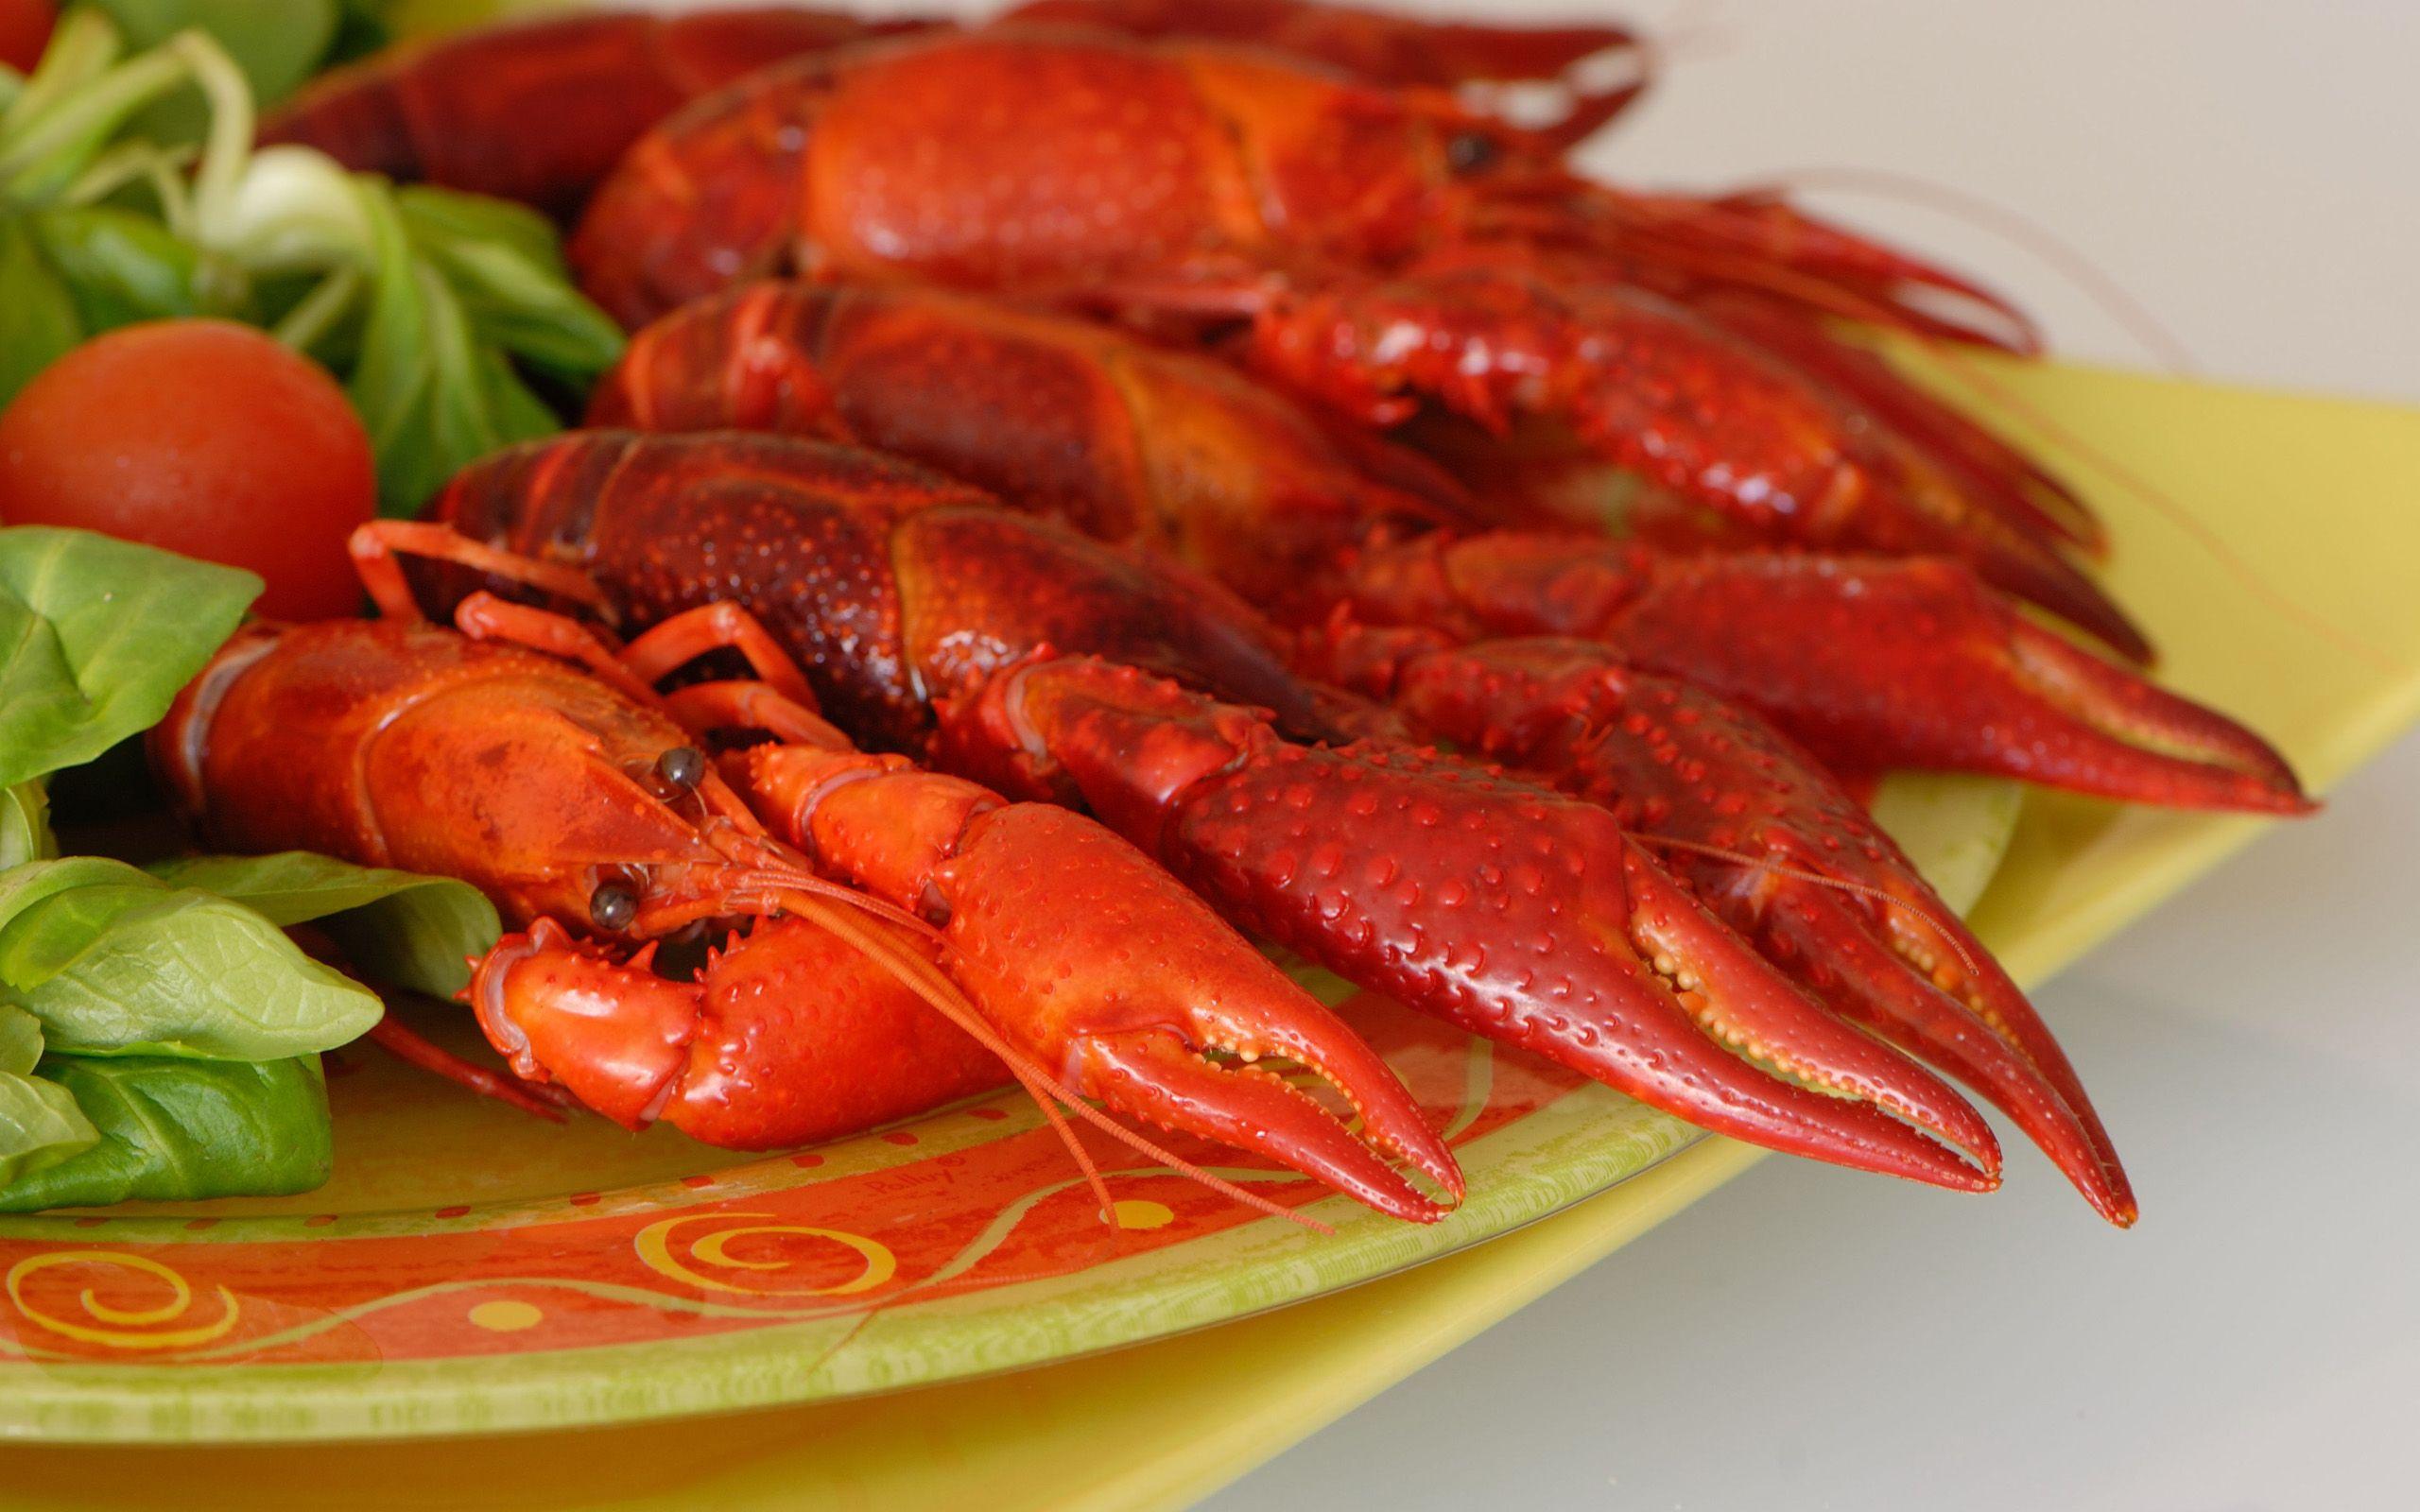 Crawfish HD Wallpaper and Background Image